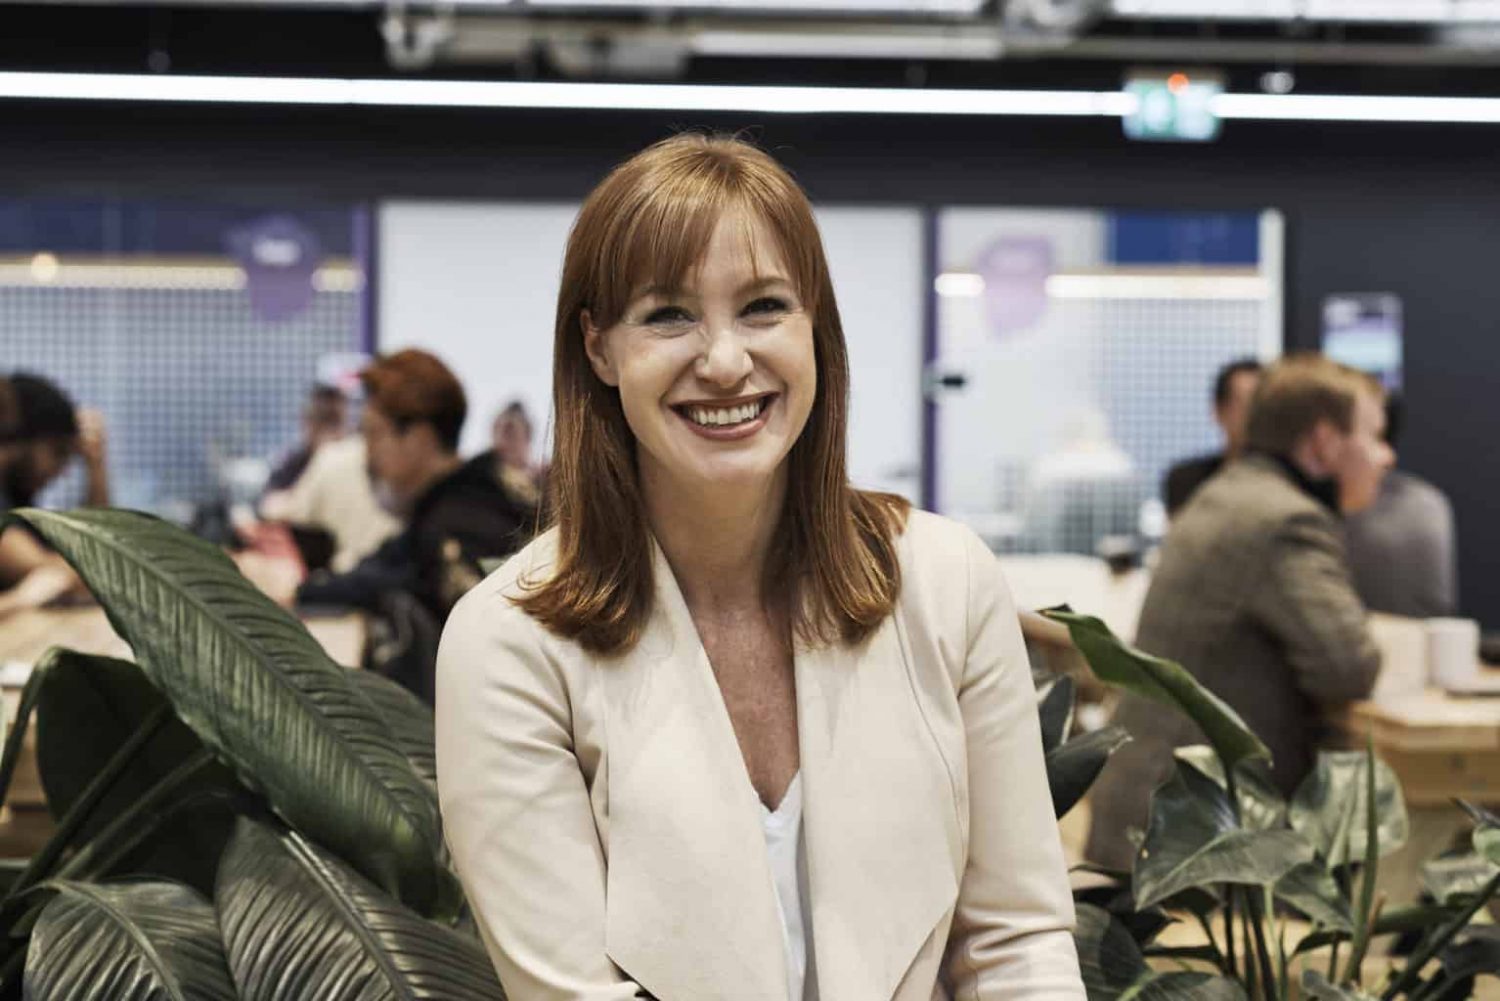 MYOB’s Sally Elson Explains How They Aim To Achieve Gender Diversity Goals